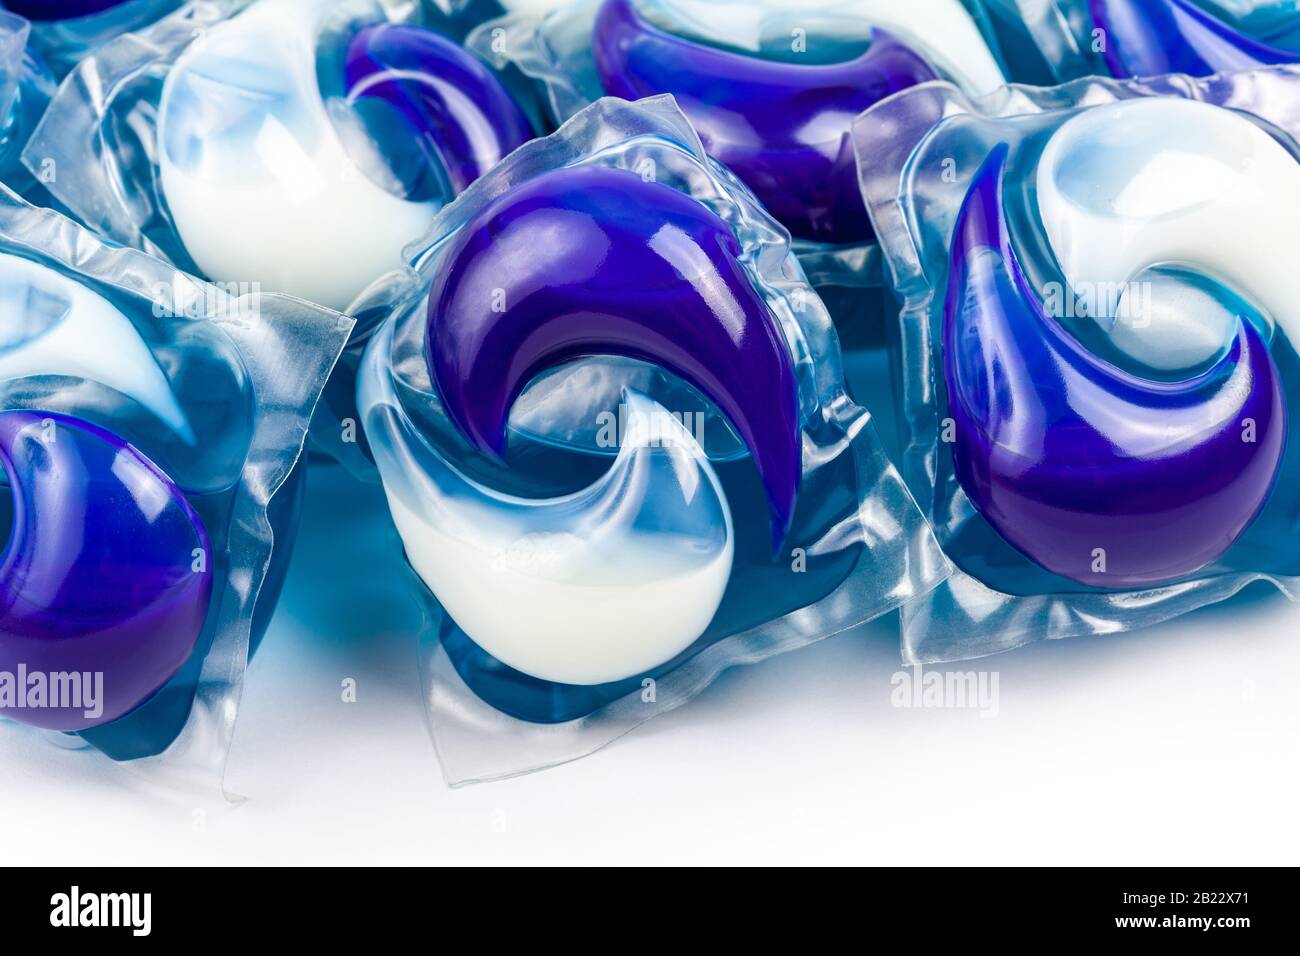 A pile of washing dishwasher or laundry blue white chemical detergent pods, packs, pouches closeup macro detail. Household items, objects concept, set Stock Photo